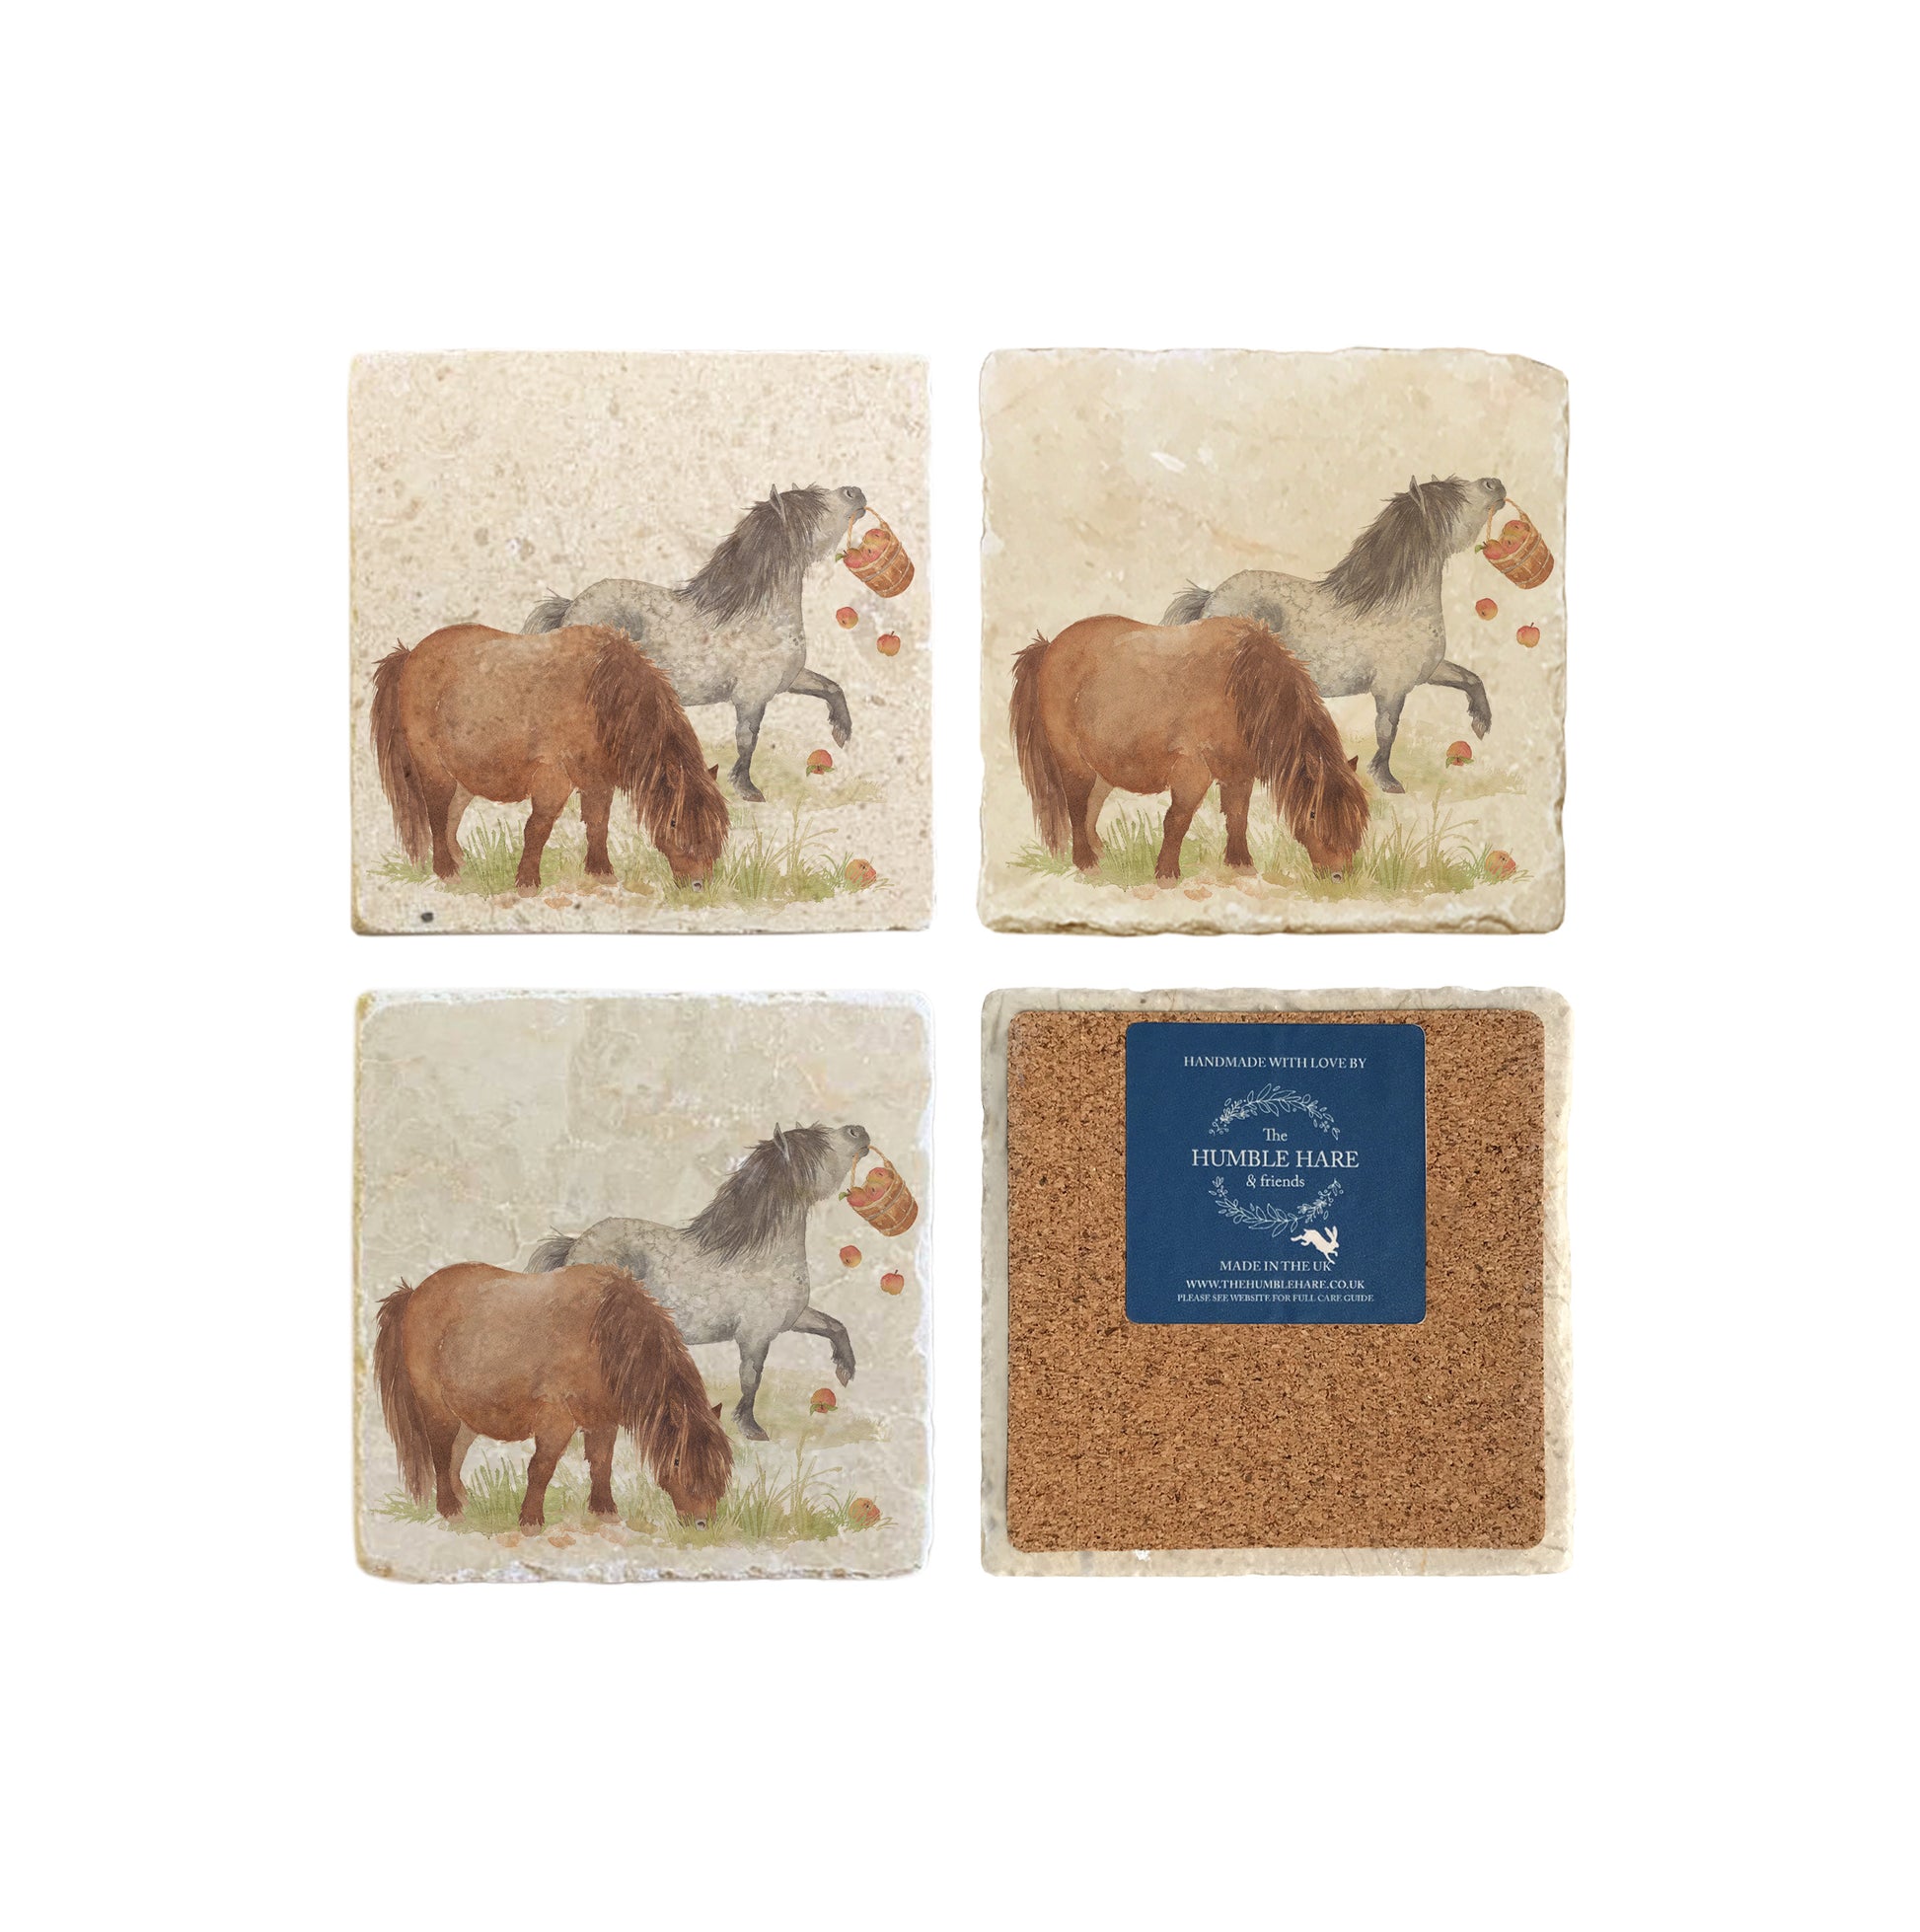 A set of 4 square marble coasters, featuring a watercolour design of cheeky Shetland ponies. One coaster is flipped to show that the coasters are backed with cork.